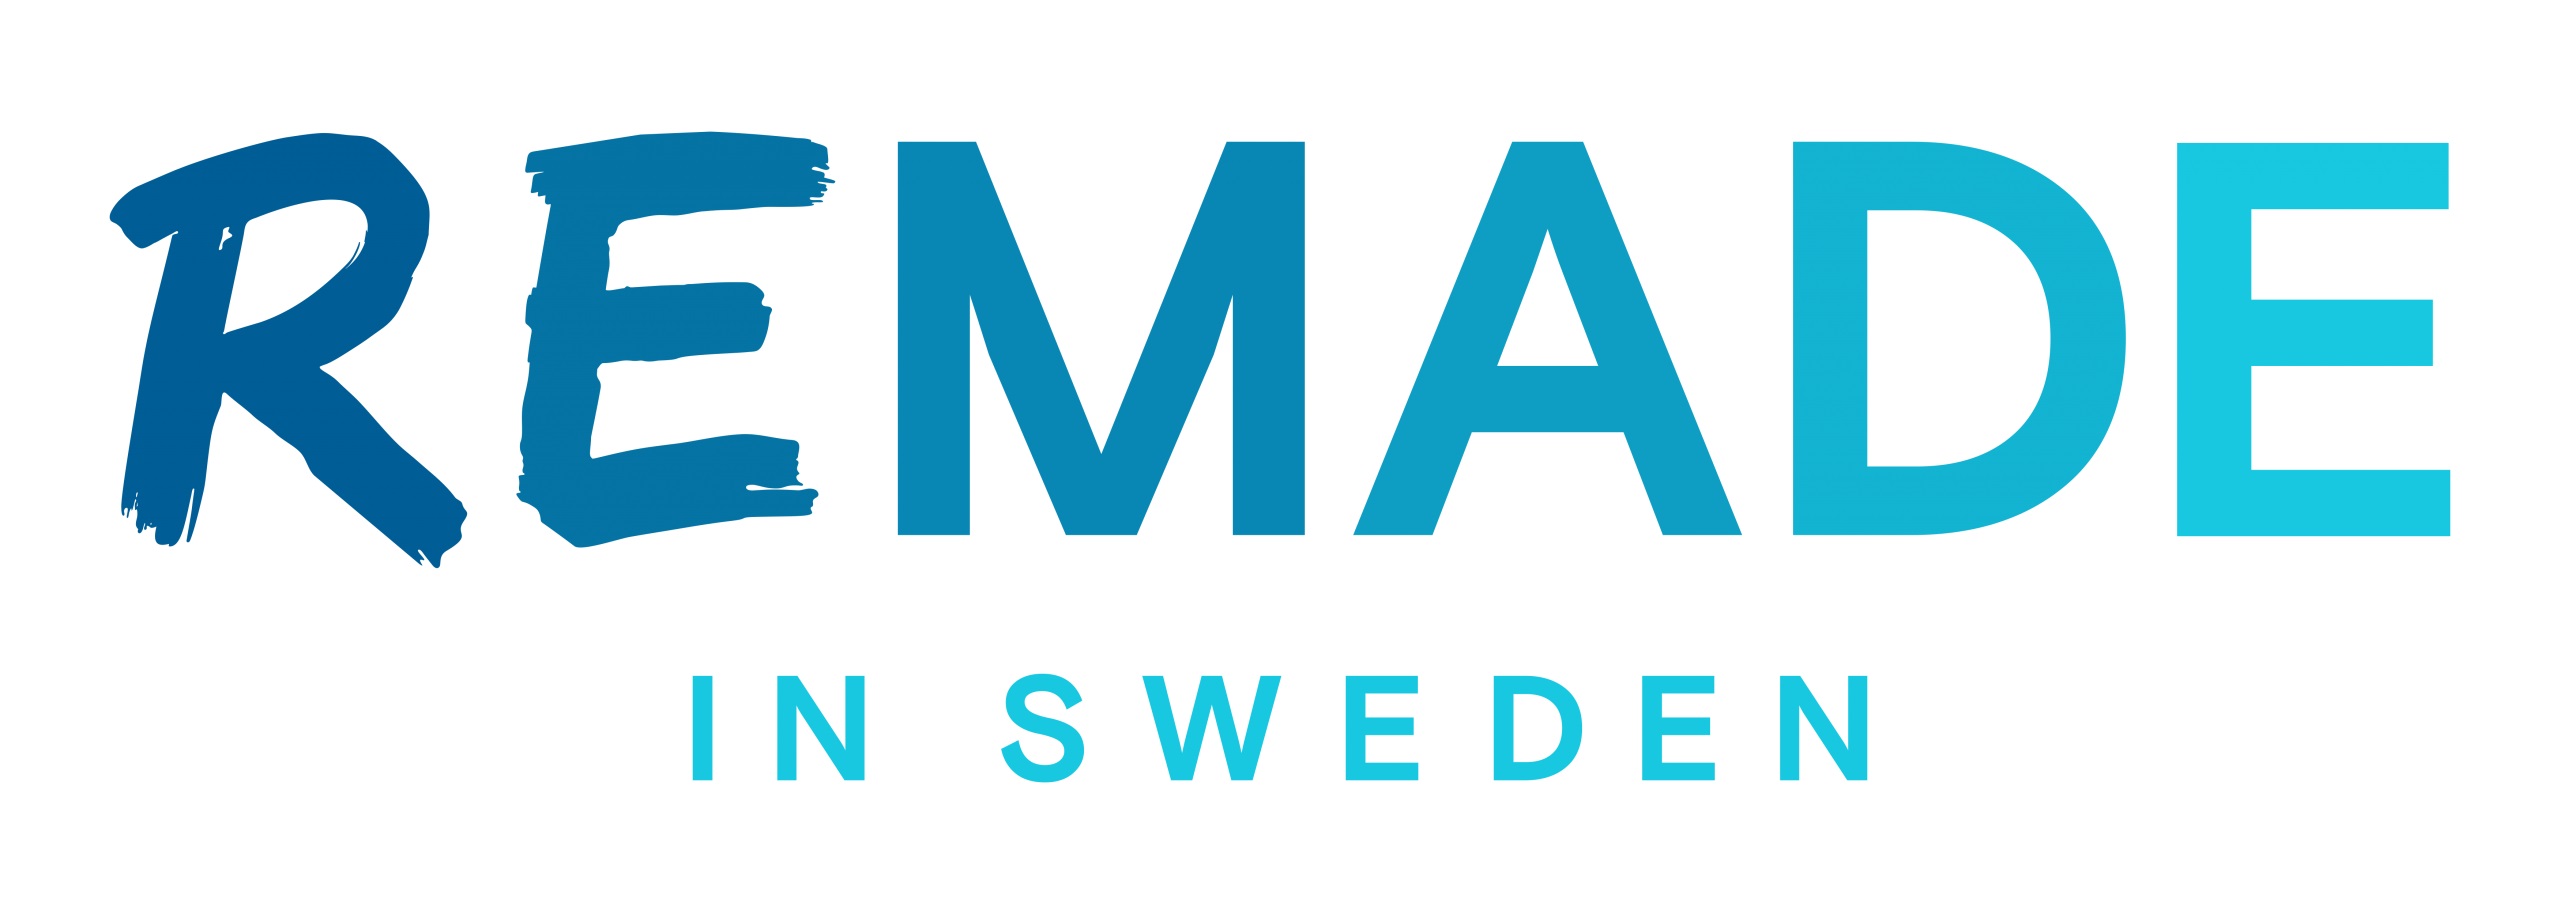 Remade in Sweden, making things better for customers and the environment, ASCDI Podcast